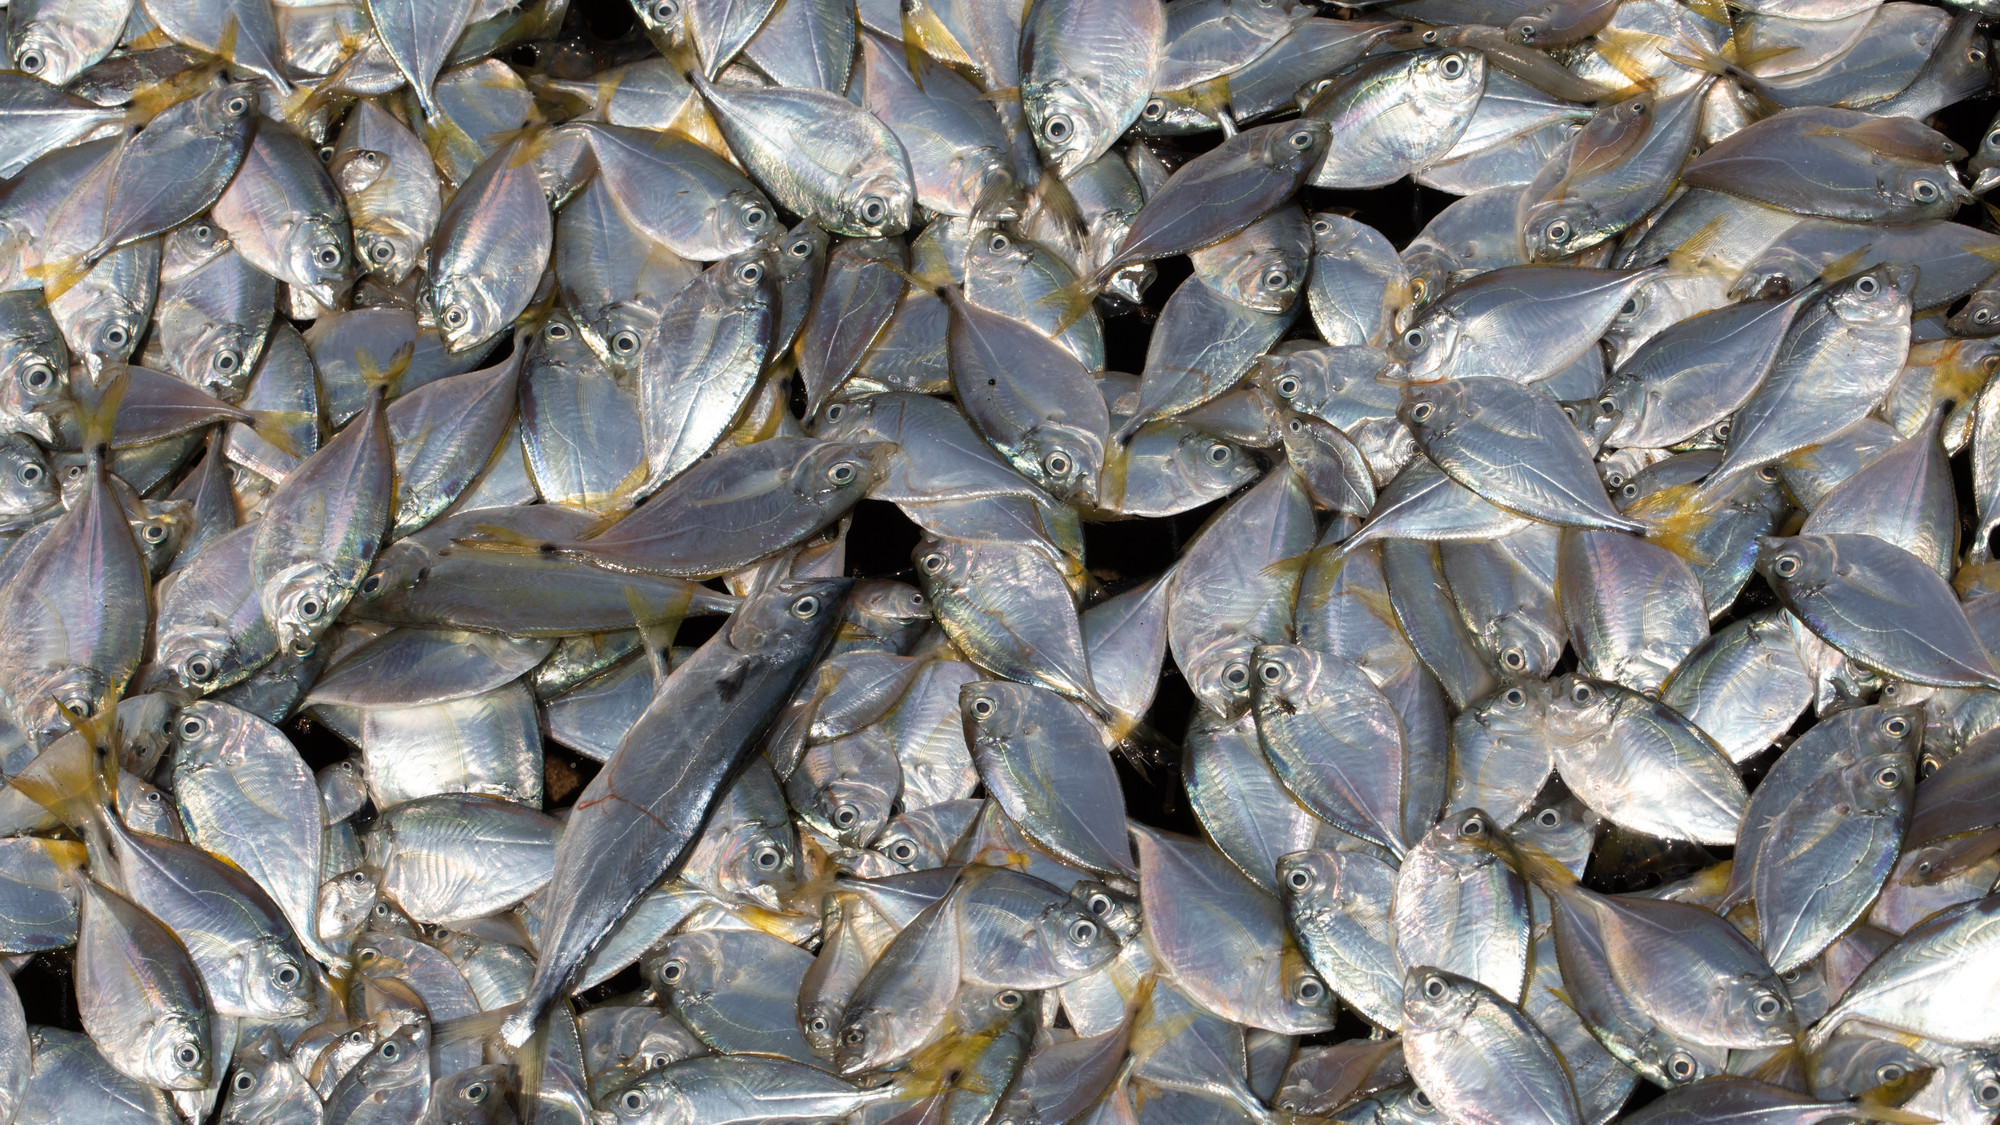 European Fish Dependence Day: Europe runs out of fish